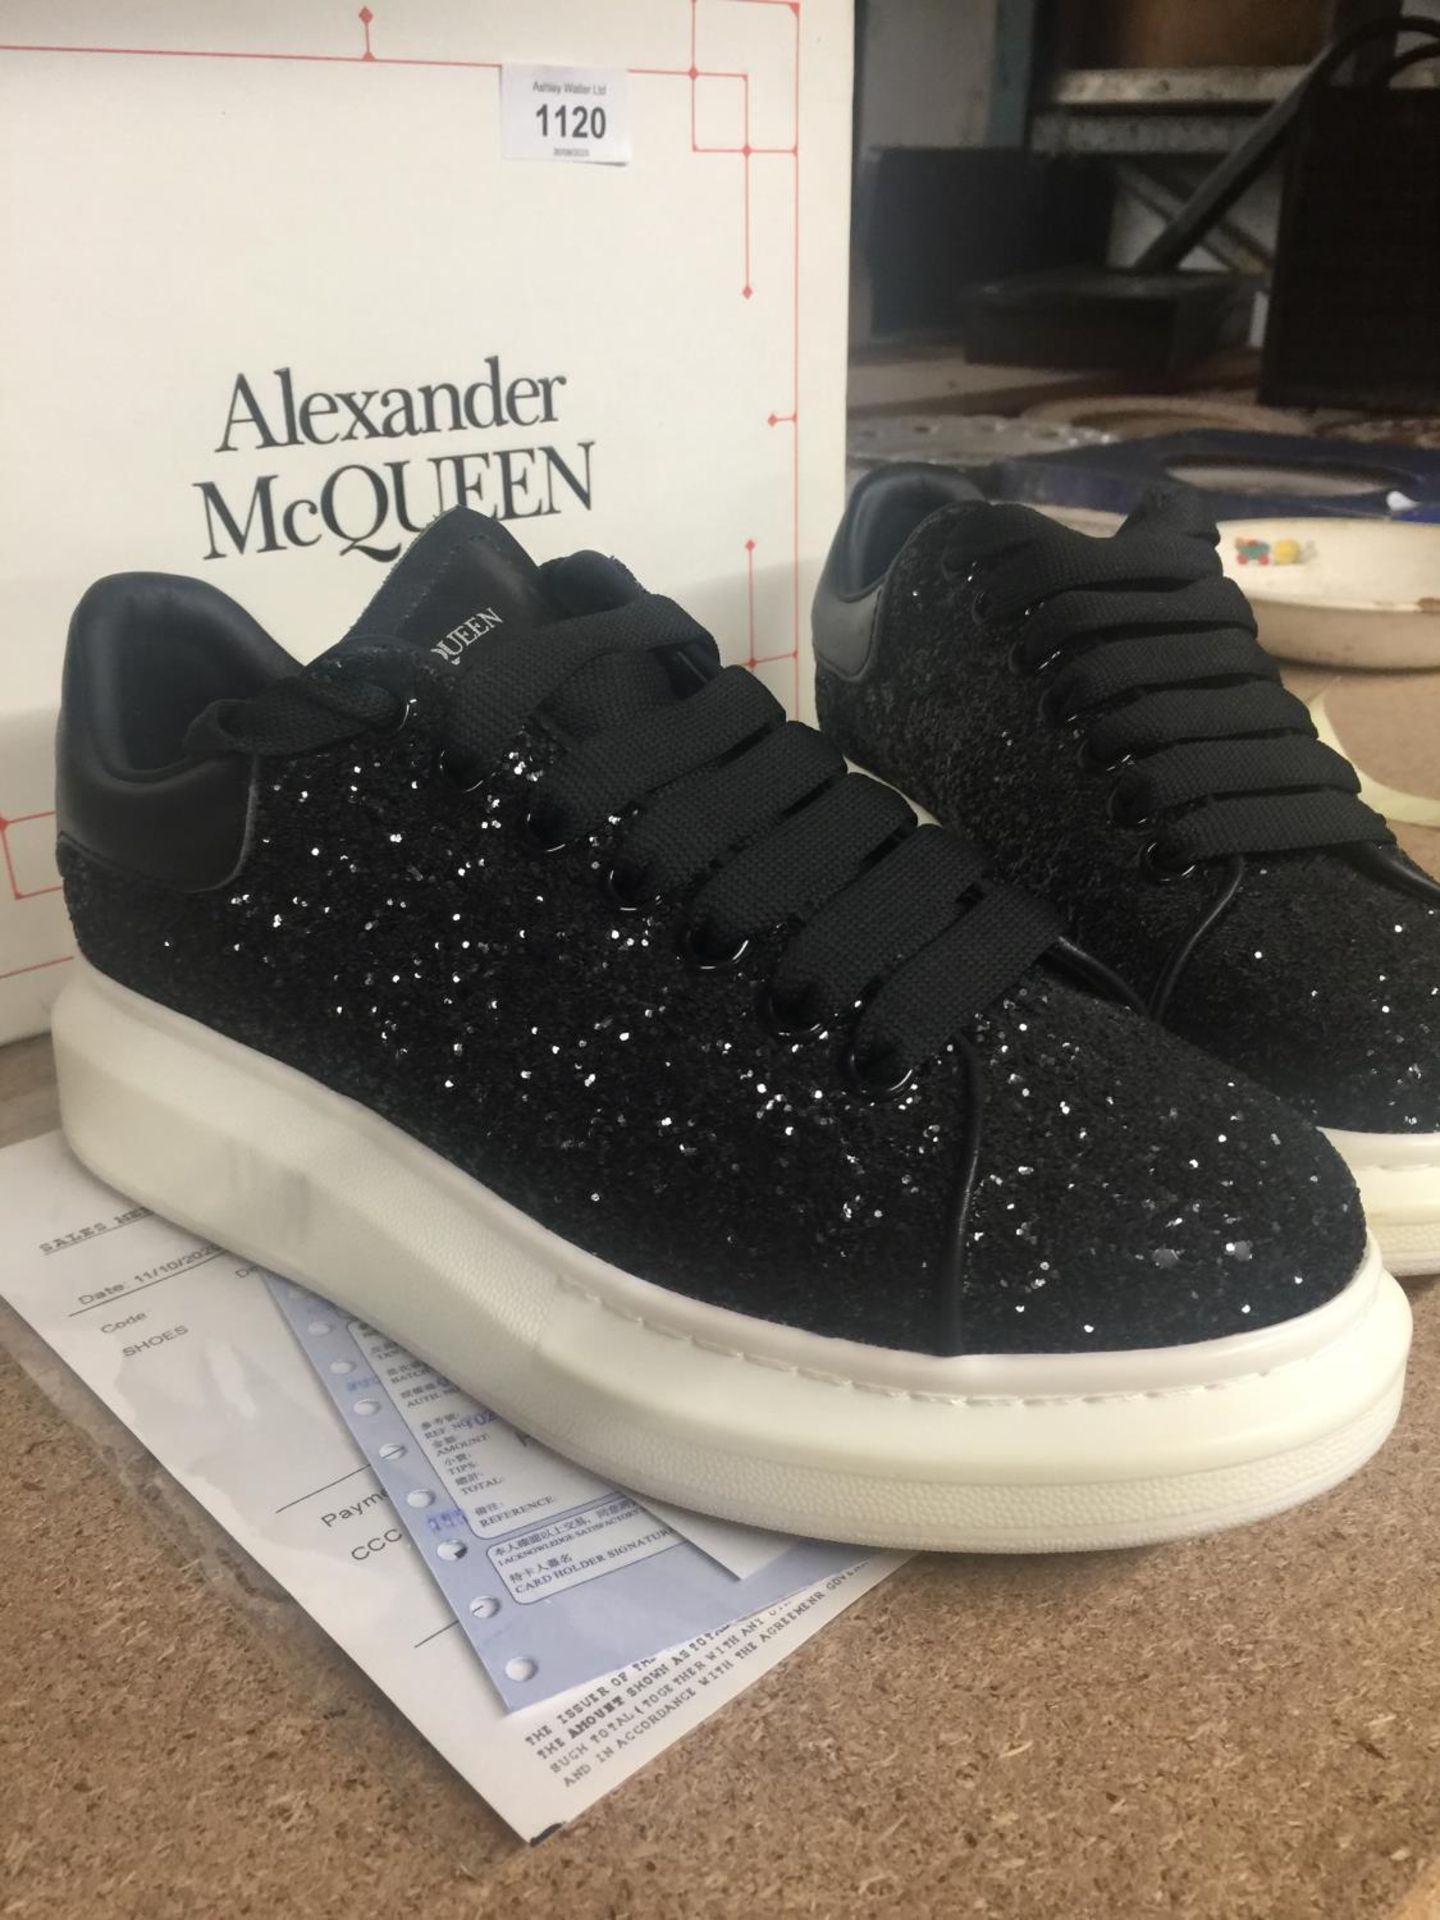 A PAIR OF ALEXANDER McQUEEN BLACK WOMEN'S CASUAL TRAINERS, SIZE 6, WITH ORIGINAL PAPERWORK, BOXED - Image 2 of 5